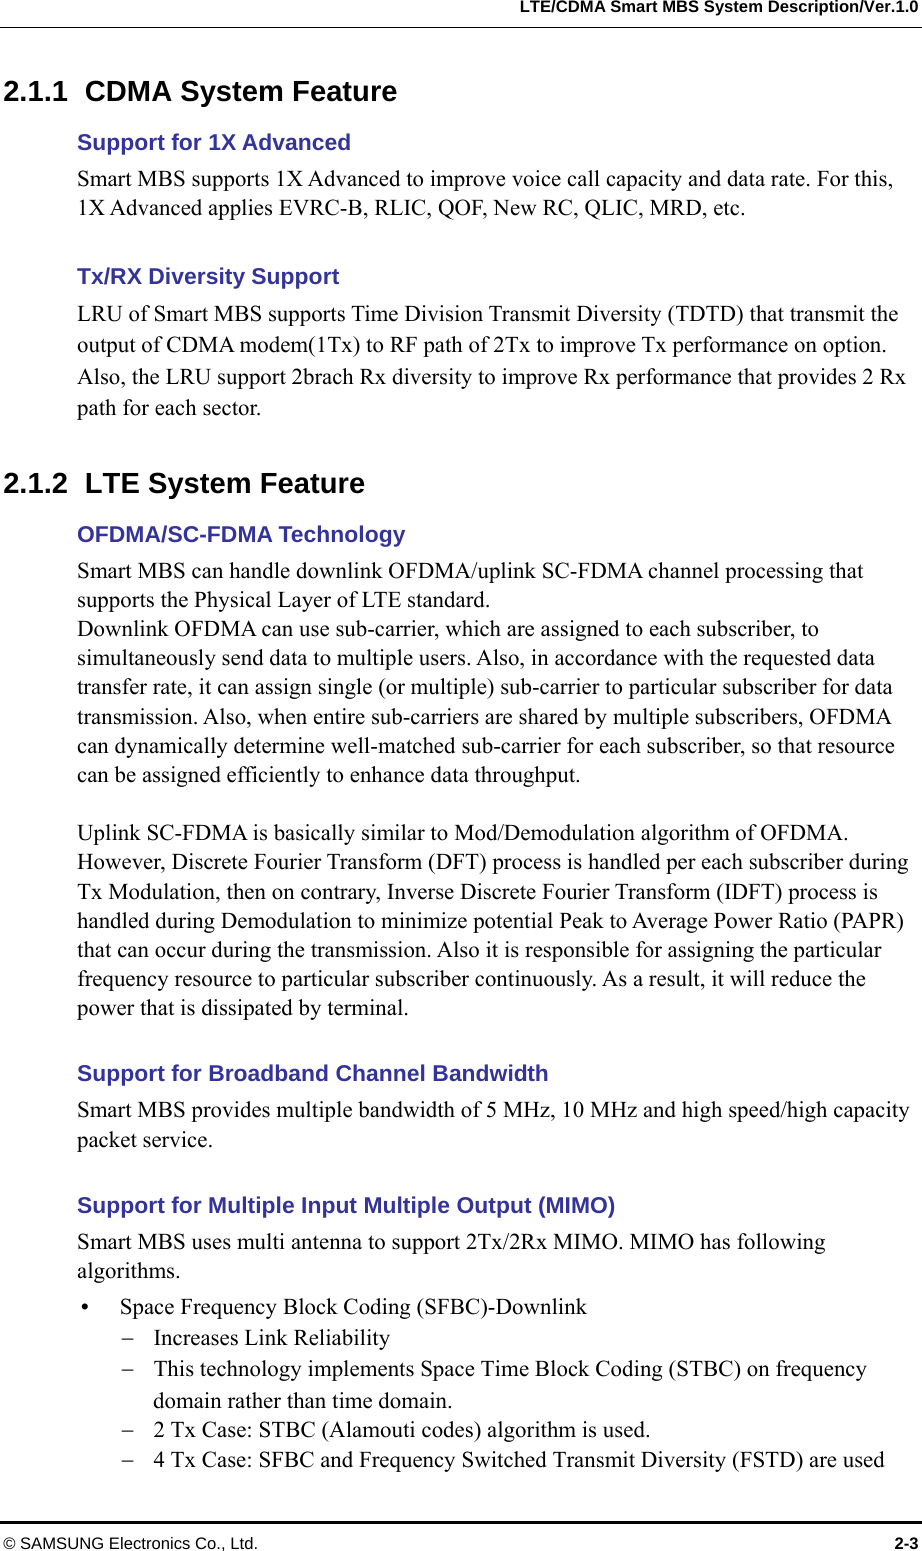   LTE/CDMA Smart MBS System Description/Ver.1.0 © SAMSUNG Electronics Co., Ltd.  2-3 2.1.1 CDMA System Feature Support for 1X Advanced   Smart MBS supports 1X Advanced to improve voice call capacity and data rate. For this, 1X Advanced applies EVRC-B, RLIC, QOF, New RC, QLIC, MRD, etc.    Tx/RX Diversity Support LRU of Smart MBS supports Time Division Transmit Diversity (TDTD) that transmit the output of CDMA modem(1Tx) to RF path of 2Tx to improve Tx performance on option.   Also, the LRU support 2brach Rx diversity to improve Rx performance that provides 2 Rx path for each sector.    2.1.2  LTE System Feature OFDMA/SC-FDMA Technology Smart MBS can handle downlink OFDMA/uplink SC-FDMA channel processing that supports the Physical Layer of LTE standard. Downlink OFDMA can use sub-carrier, which are assigned to each subscriber, to simultaneously send data to multiple users. Also, in accordance with the requested data transfer rate, it can assign single (or multiple) sub-carrier to particular subscriber for data transmission. Also, when entire sub-carriers are shared by multiple subscribers, OFDMA can dynamically determine well-matched sub-carrier for each subscriber, so that resource can be assigned efficiently to enhance data throughput.  Uplink SC-FDMA is basically similar to Mod/Demodulation algorithm of OFDMA.   However, Discrete Fourier Transform (DFT) process is handled per each subscriber during Tx Modulation, then on contrary, Inverse Discrete Fourier Transform (IDFT) process is handled during Demodulation to minimize potential Peak to Average Power Ratio (PAPR) that can occur during the transmission. Also it is responsible for assigning the particular frequency resource to particular subscriber continuously. As a result, it will reduce the power that is dissipated by terminal.  Support for Broadband Channel Bandwidth Smart MBS provides multiple bandwidth of 5 MHz, 10 MHz and high speed/high capacity packet service.    Support for Multiple Input Multiple Output (MIMO) Smart MBS uses multi antenna to support 2Tx/2Rx MIMO. MIMO has following algorithms.   Space Frequency Block Coding (SFBC)-Downlink  Increases Link Reliability  This technology implements Space Time Block Coding (STBC) on frequency domain rather than time domain.  2 Tx Case: STBC (Alamouti codes) algorithm is used.  4 Tx Case: SFBC and Frequency Switched Transmit Diversity (FSTD) are used 